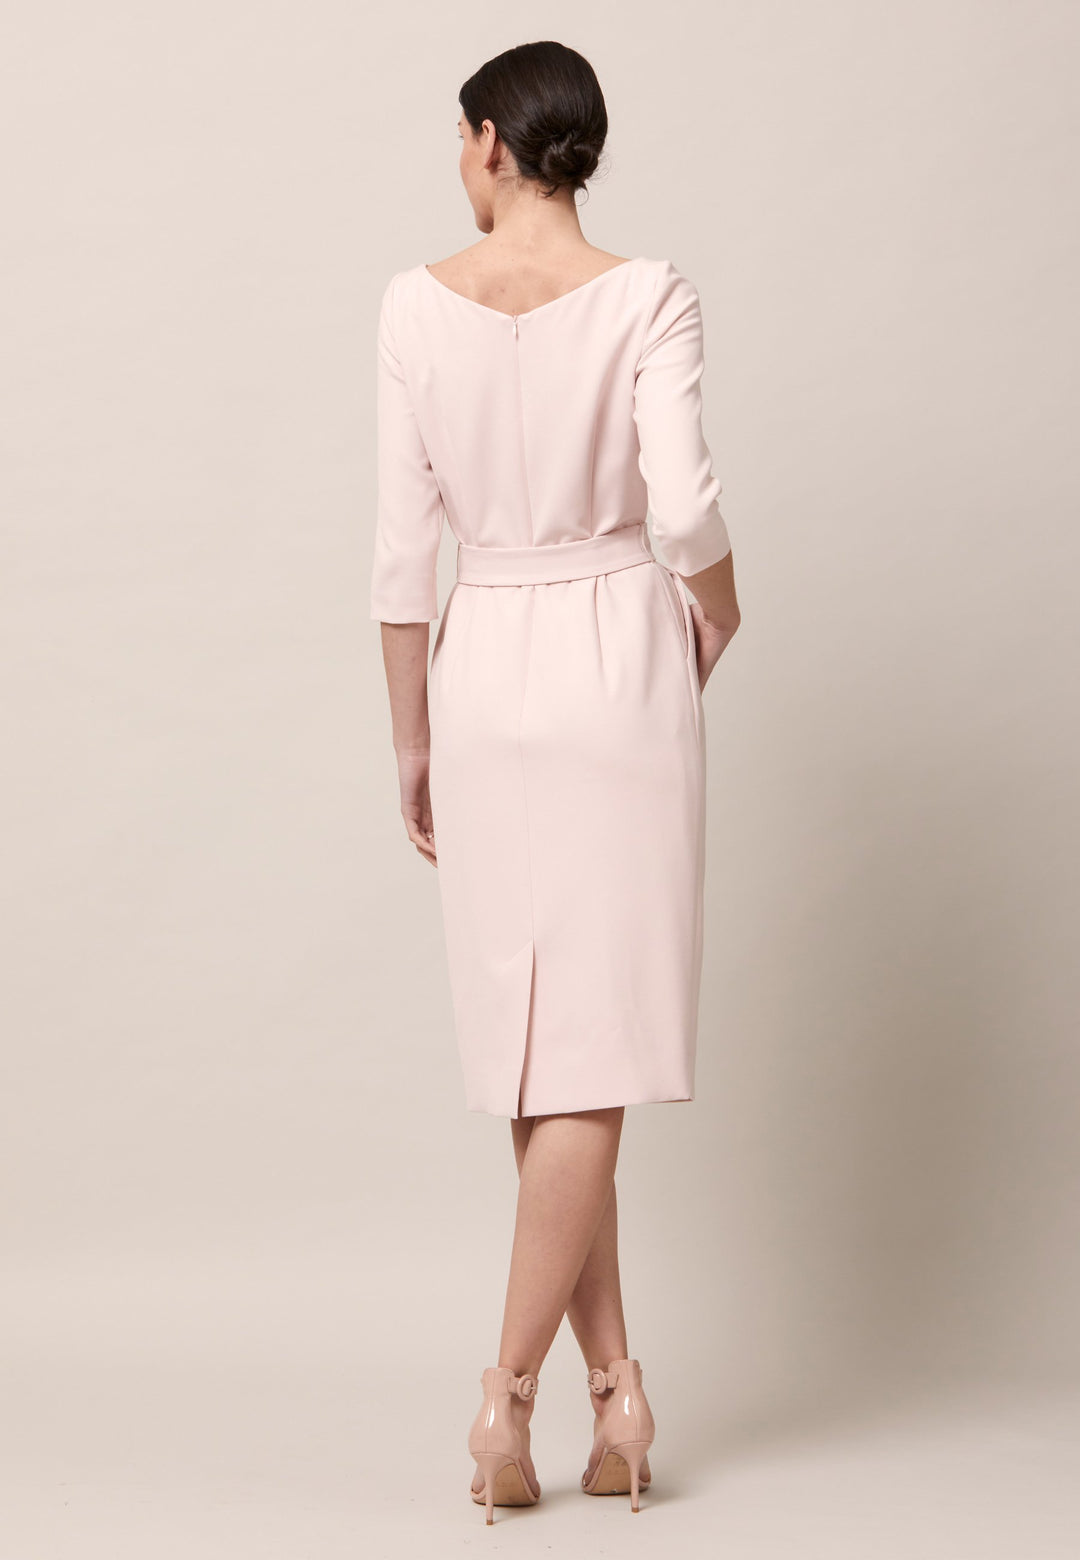 The Clara is a classic silhouette. An expertly tailored form-flattering silhouette with pockets, detachable belt & pencil skirt which falls to mid-calf. Engineered with a sophisticated wide V-neckline. Crafted from sustainably sourced fibers with a hint of stretch to ensure comfort & ease of movement. Heighten the drama of this piece with your favourite accessories and heels. Attending a summer wedding? Mother of the bride? Heading to the races? This is the dress for you.